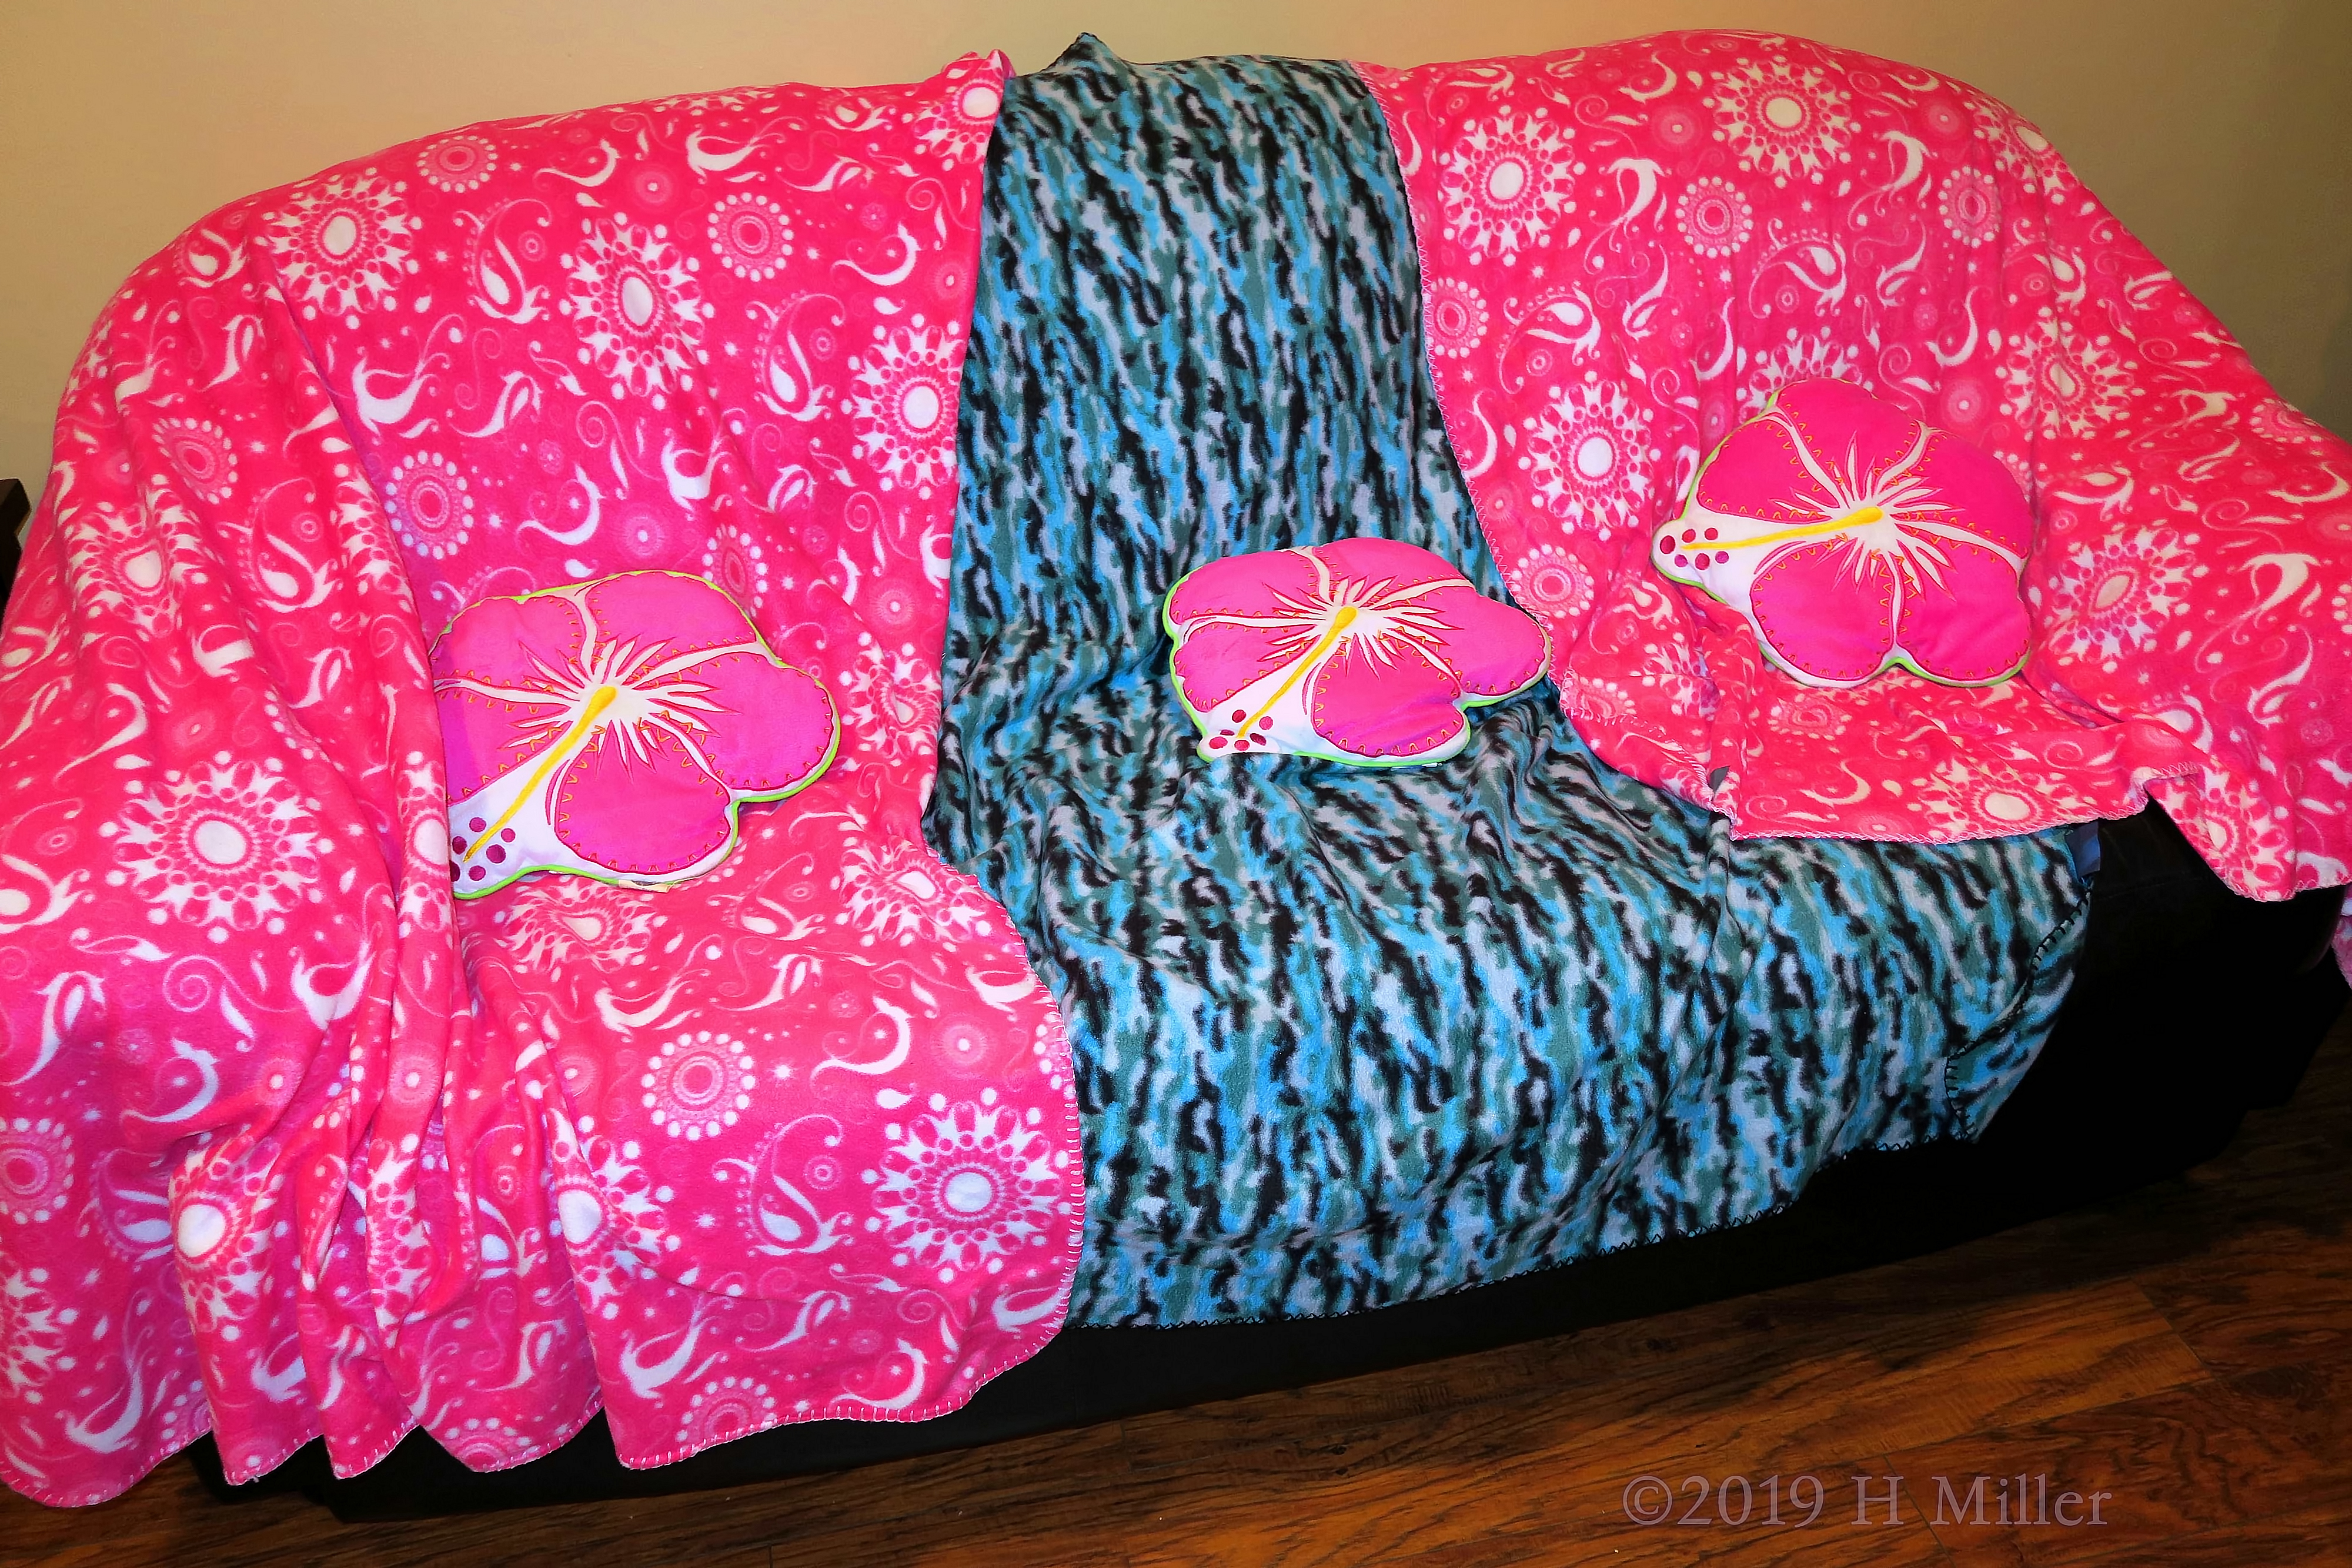 Cozy Sitting Area With Pink And Blue Spa Throws And Pillows 